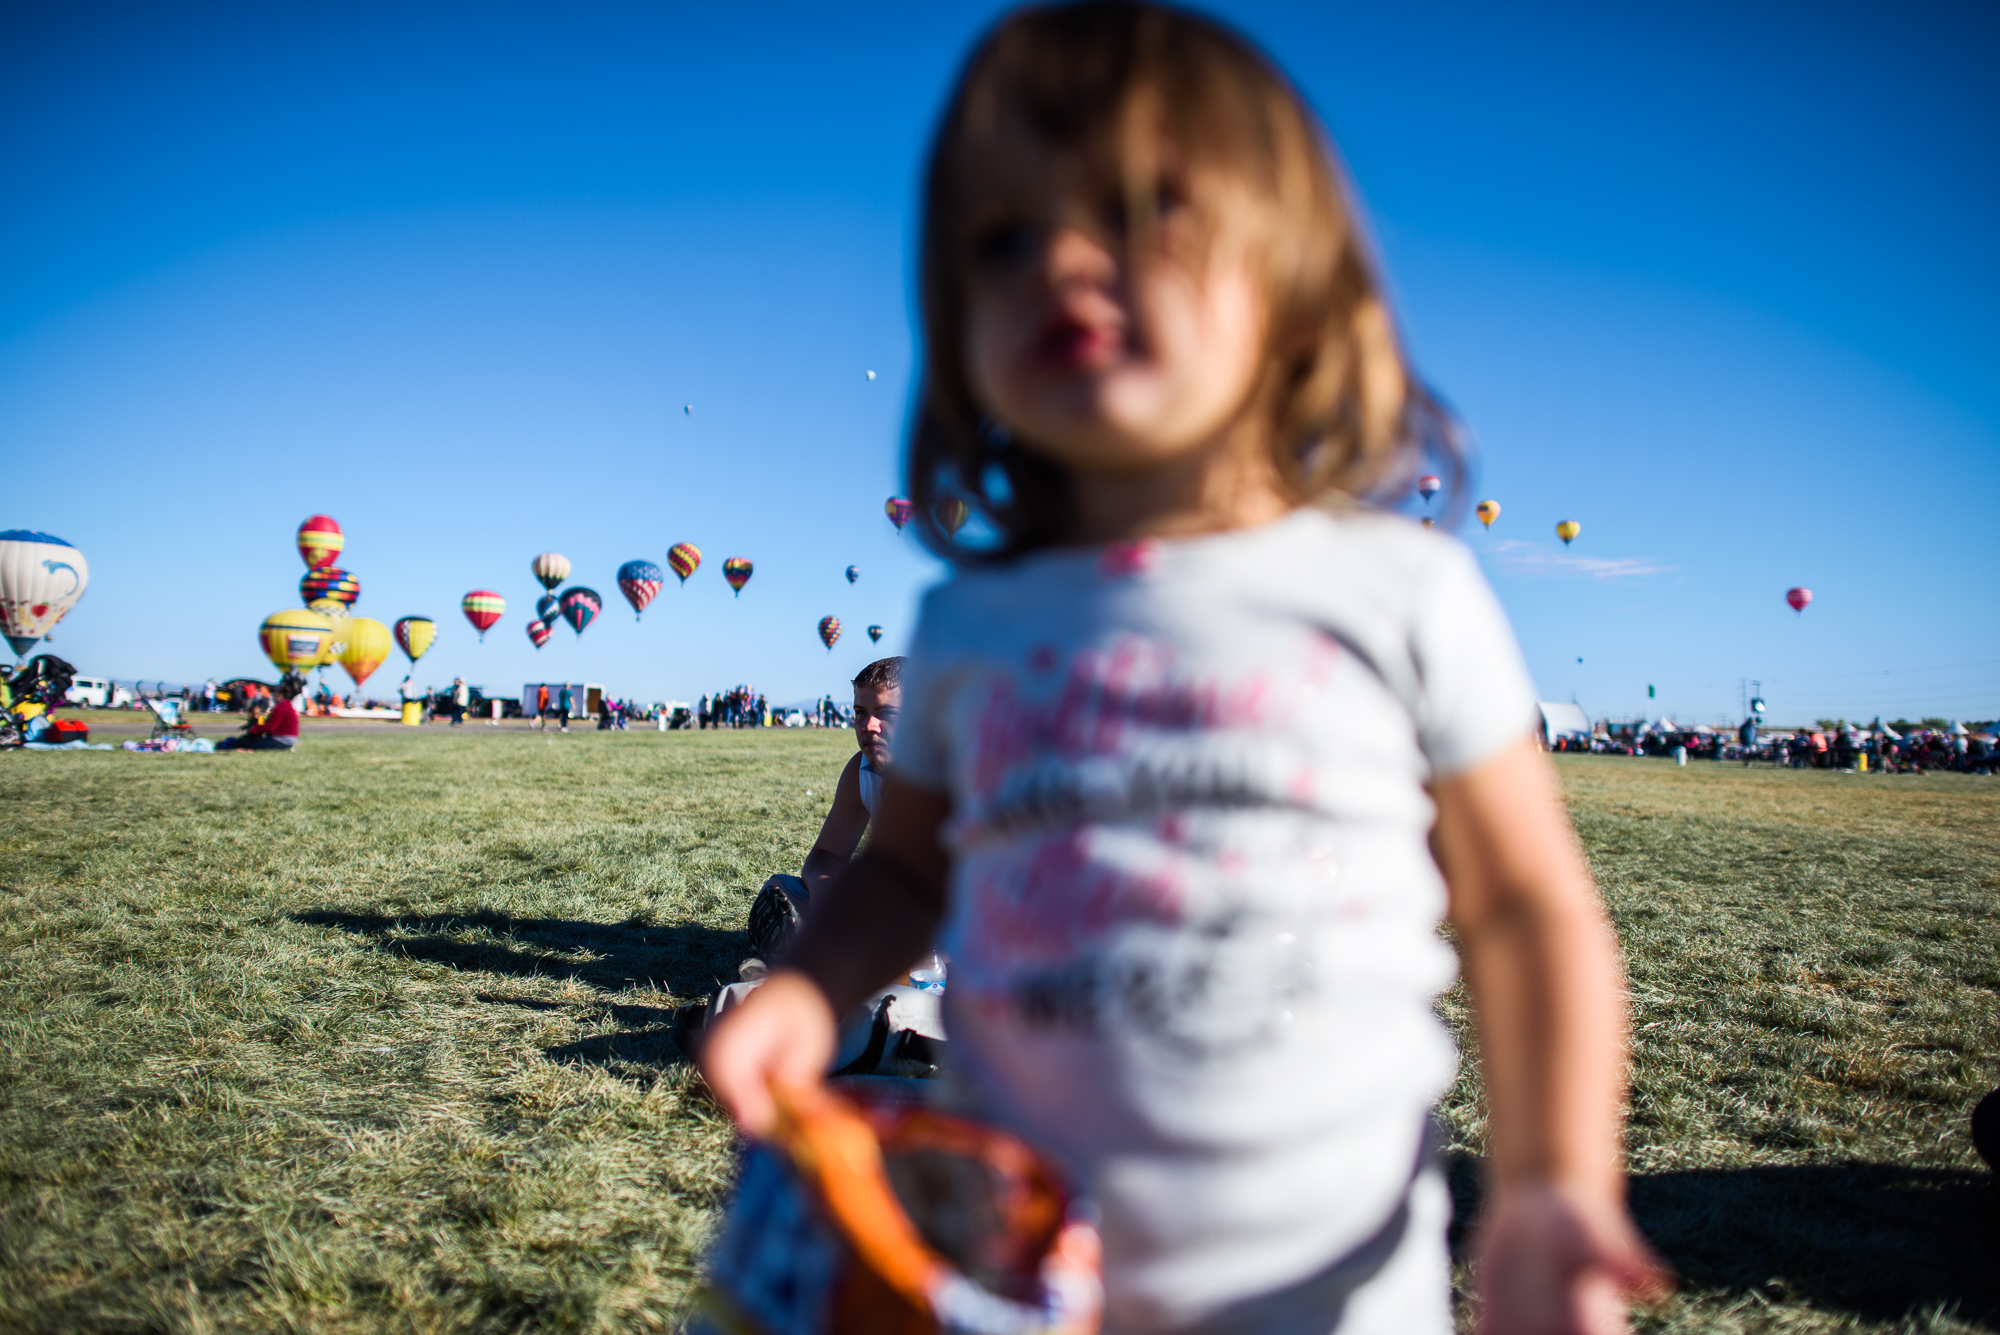  Vinny, age 18, and his daughter Jordyn, age 1, gather at the balloon fiesta in Albuquerque, 2017. 